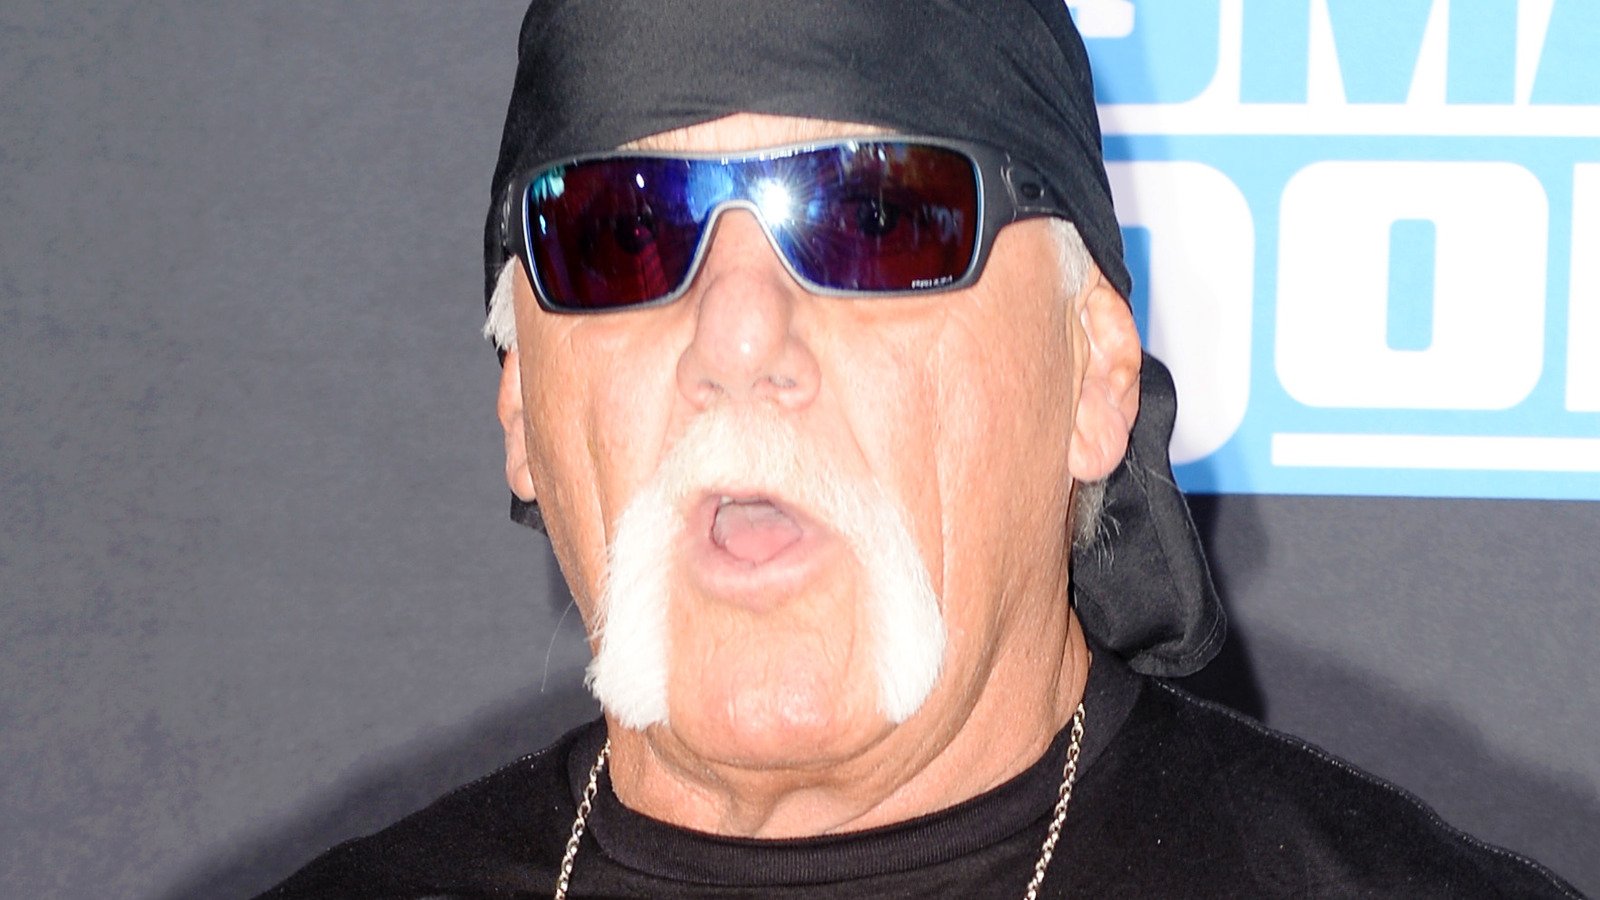 Hulk Hogan Thought His Alter Ego Would Get A Two-Year WWE Run - Wrestling Inc.